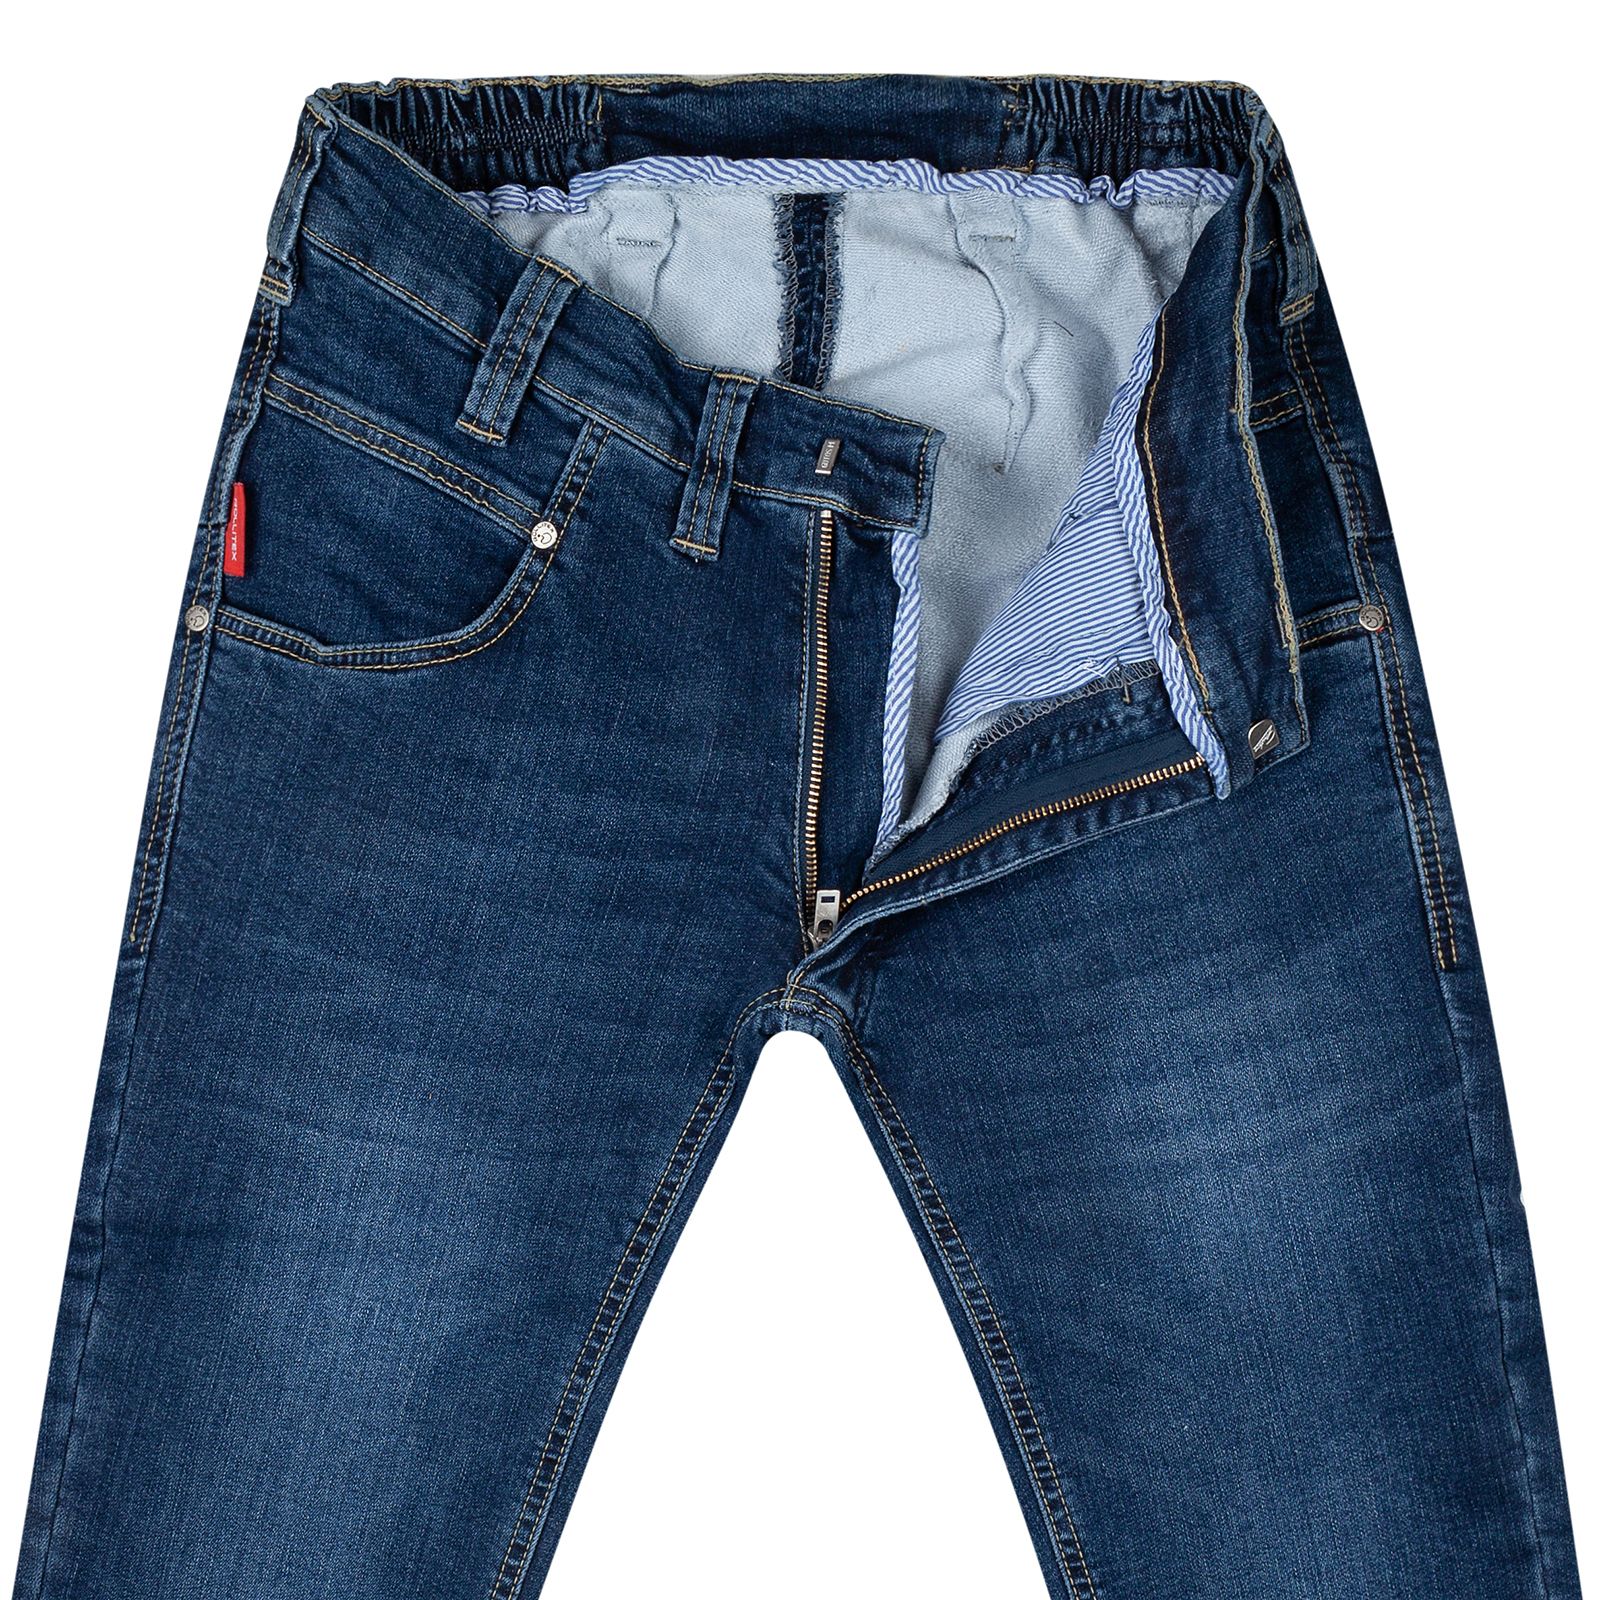 Thermo Regular-Fit Jeans with stretch denim